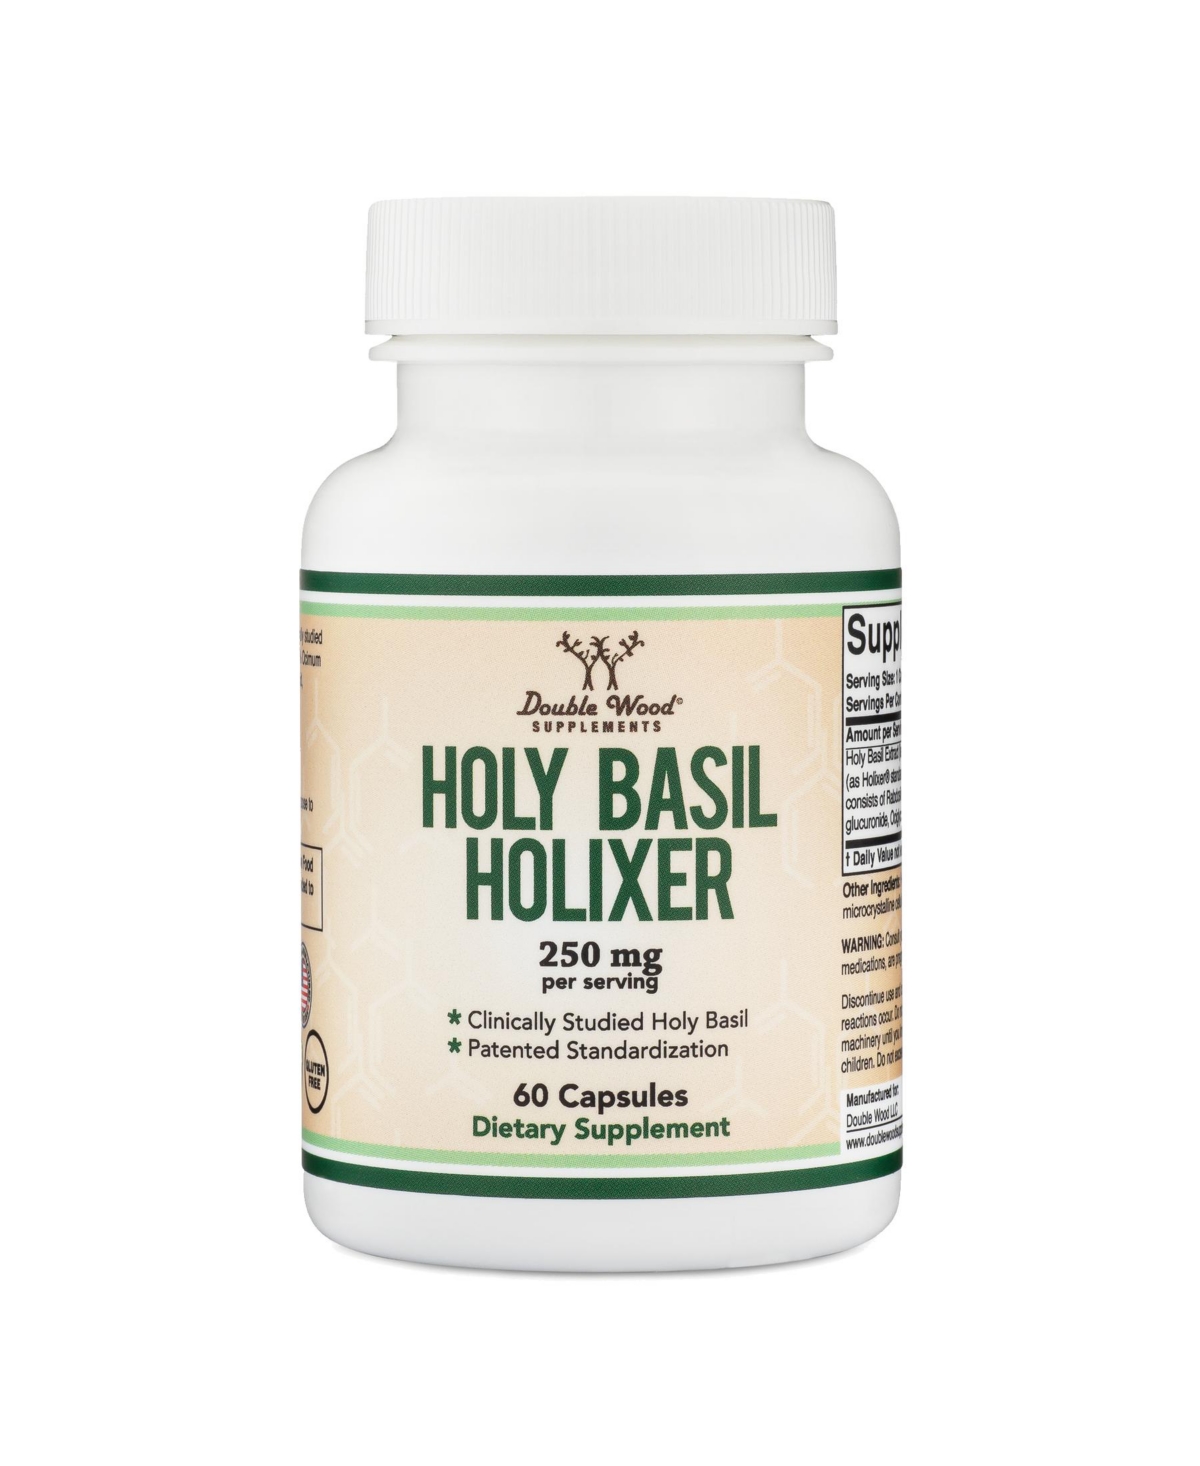 Holixer Holy Basil Extract - 60 capsules, 250 mg servings